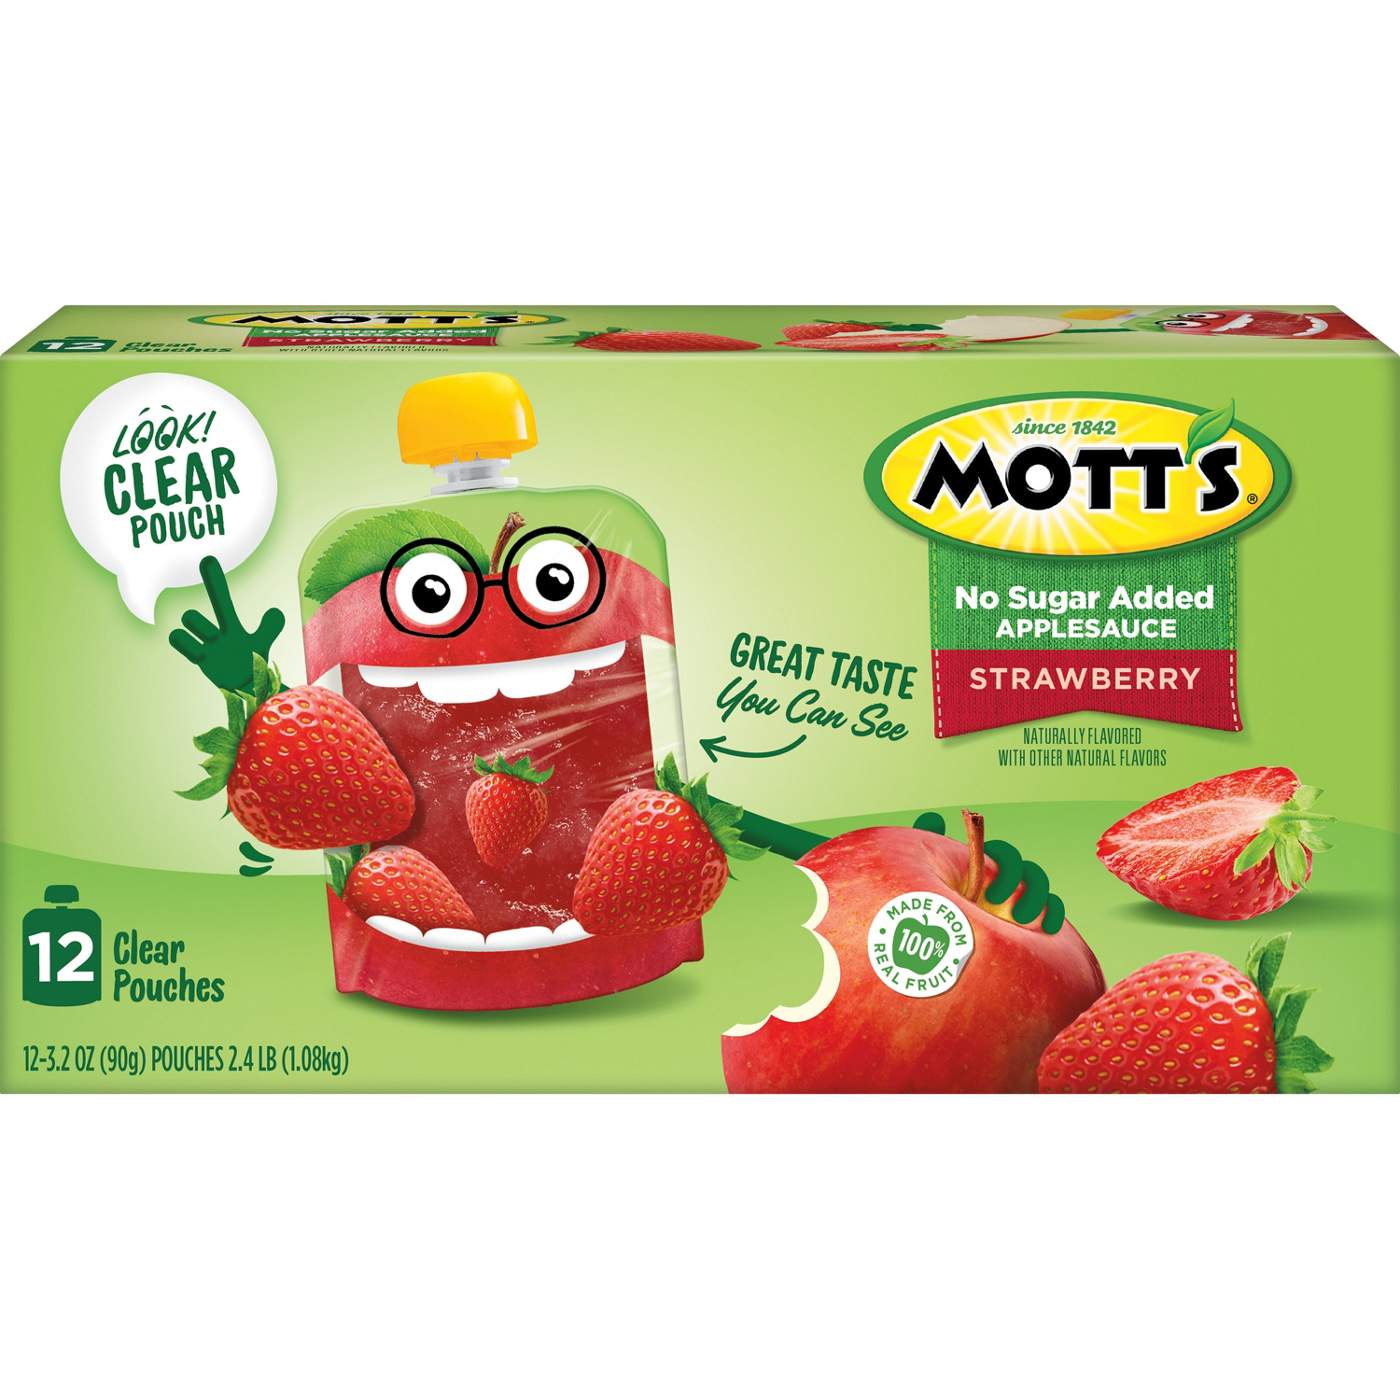 Mott's No Sugar Added Strawberry Apple Sauce Pouches; image 1 of 6